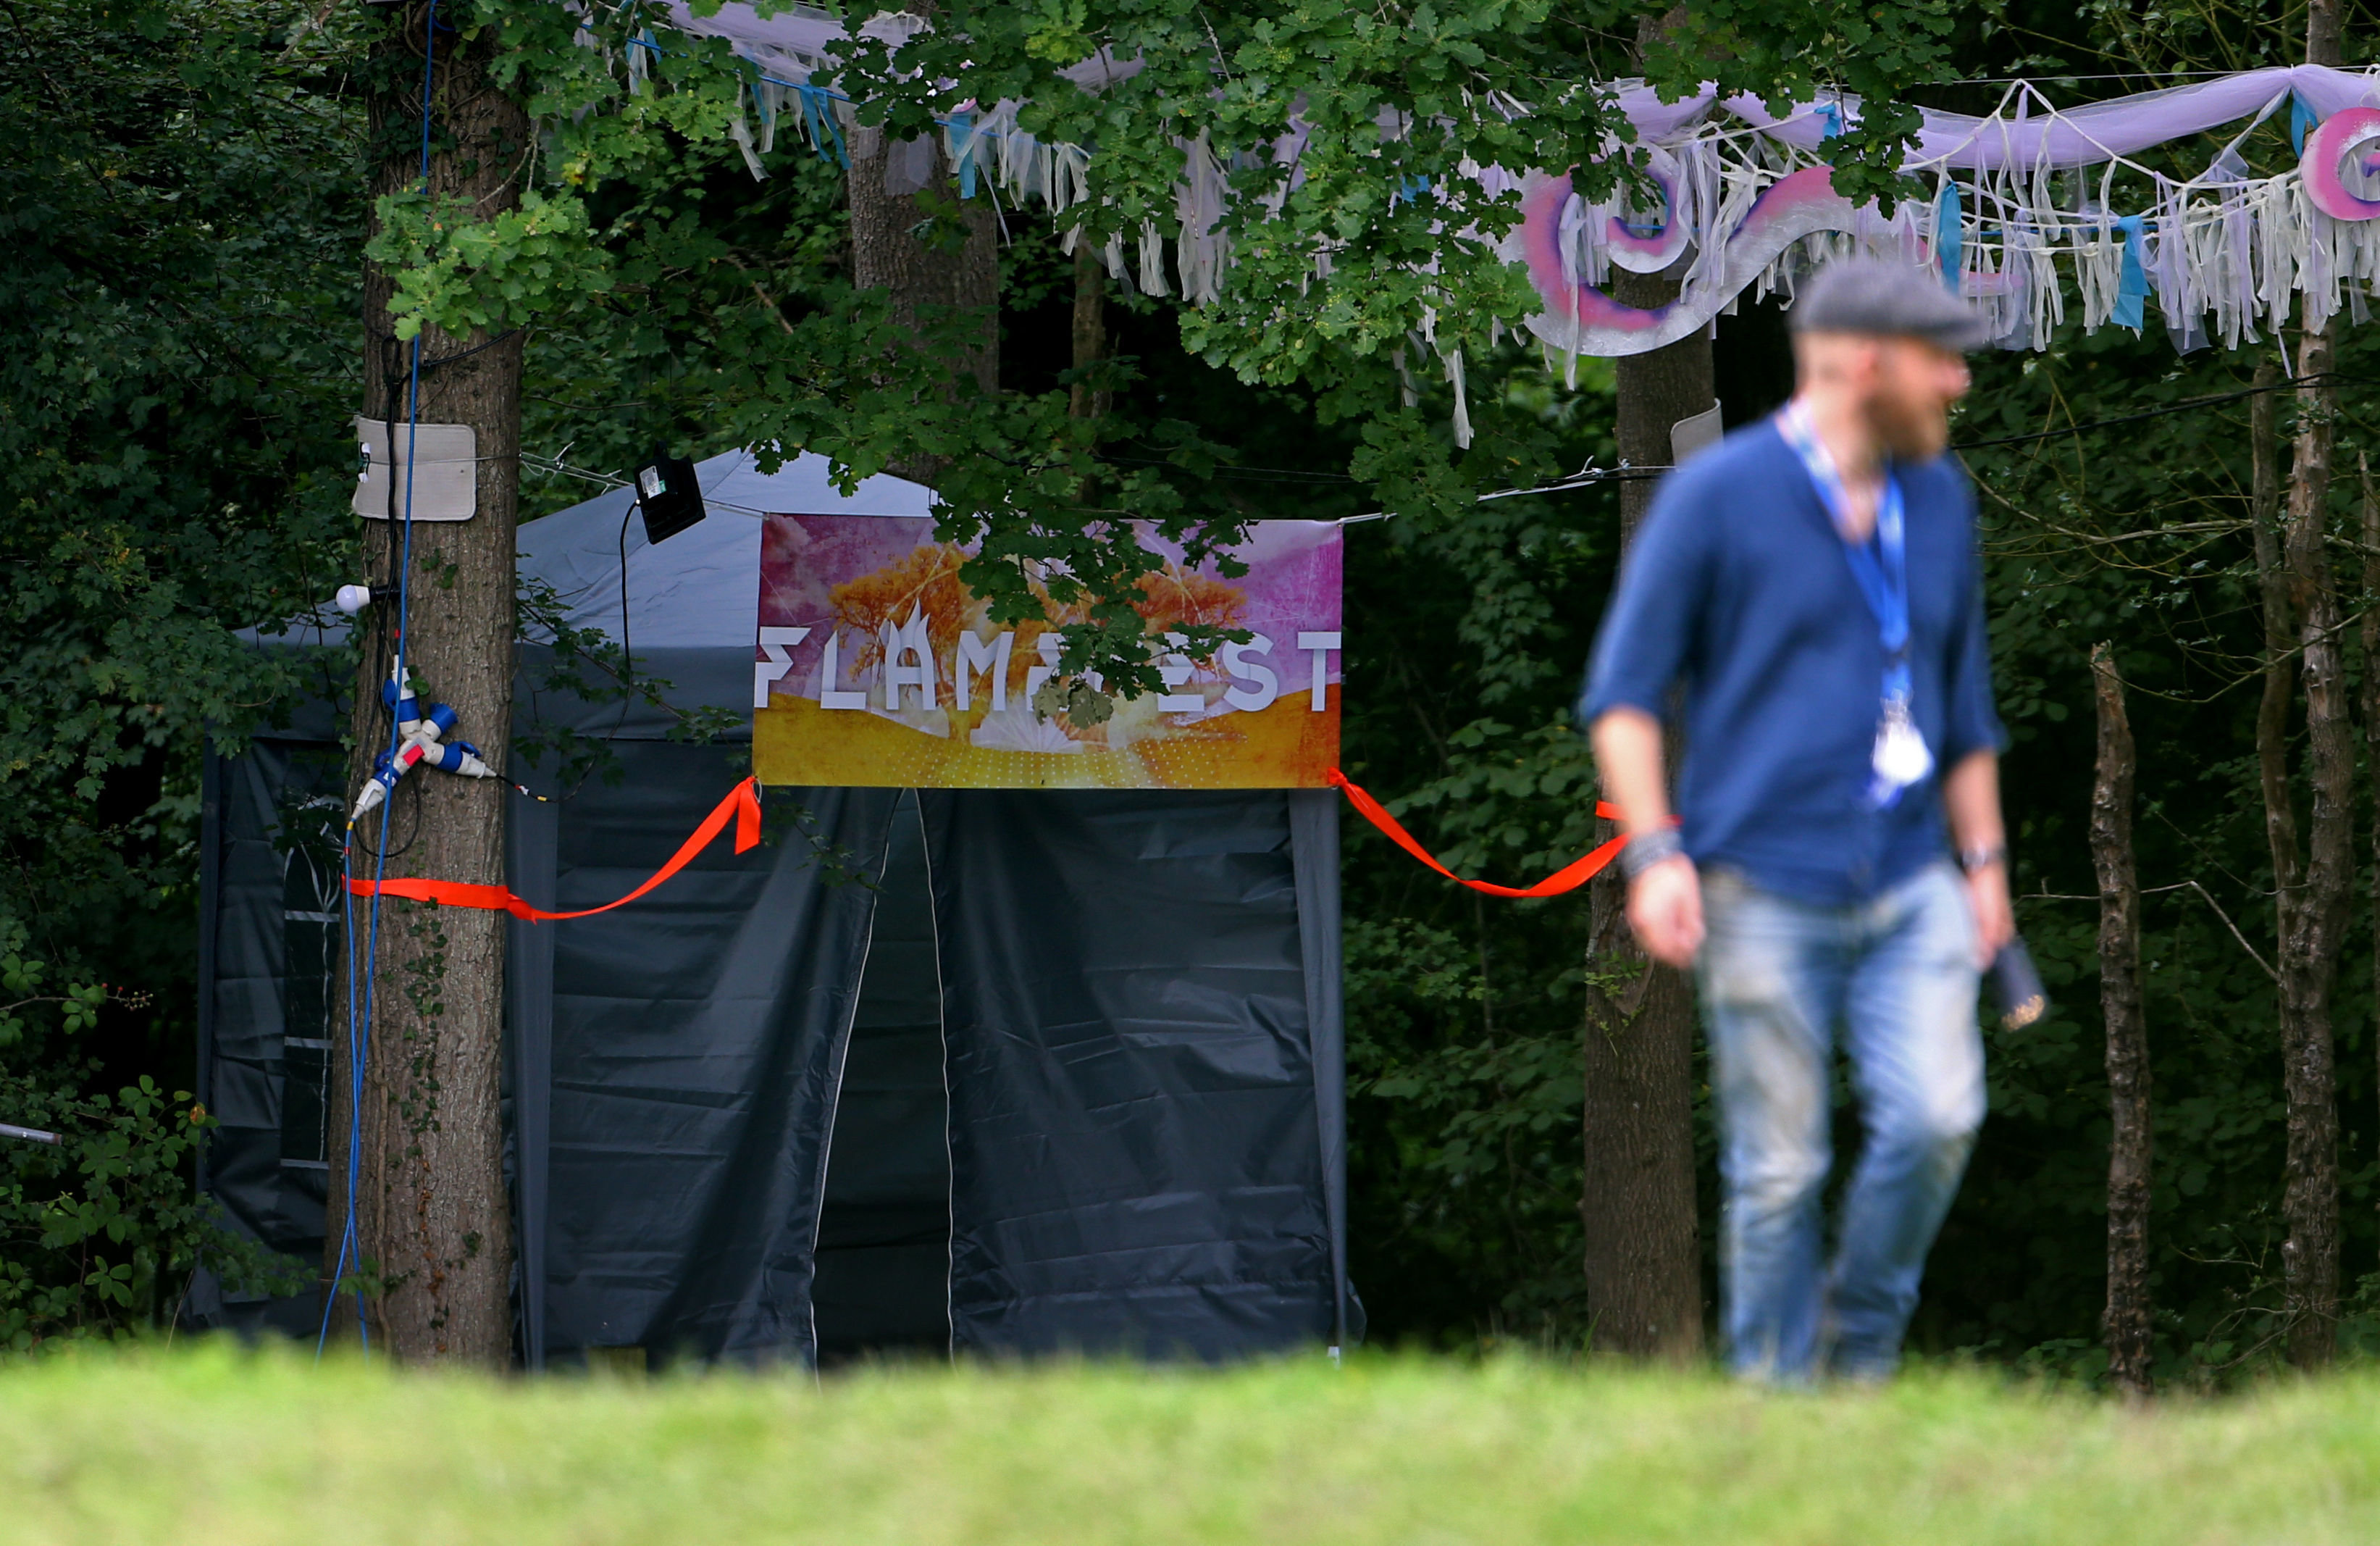 <strong>A view of the entrance to the Flamefest festival in Tunbridge Wells, Kent</strong>